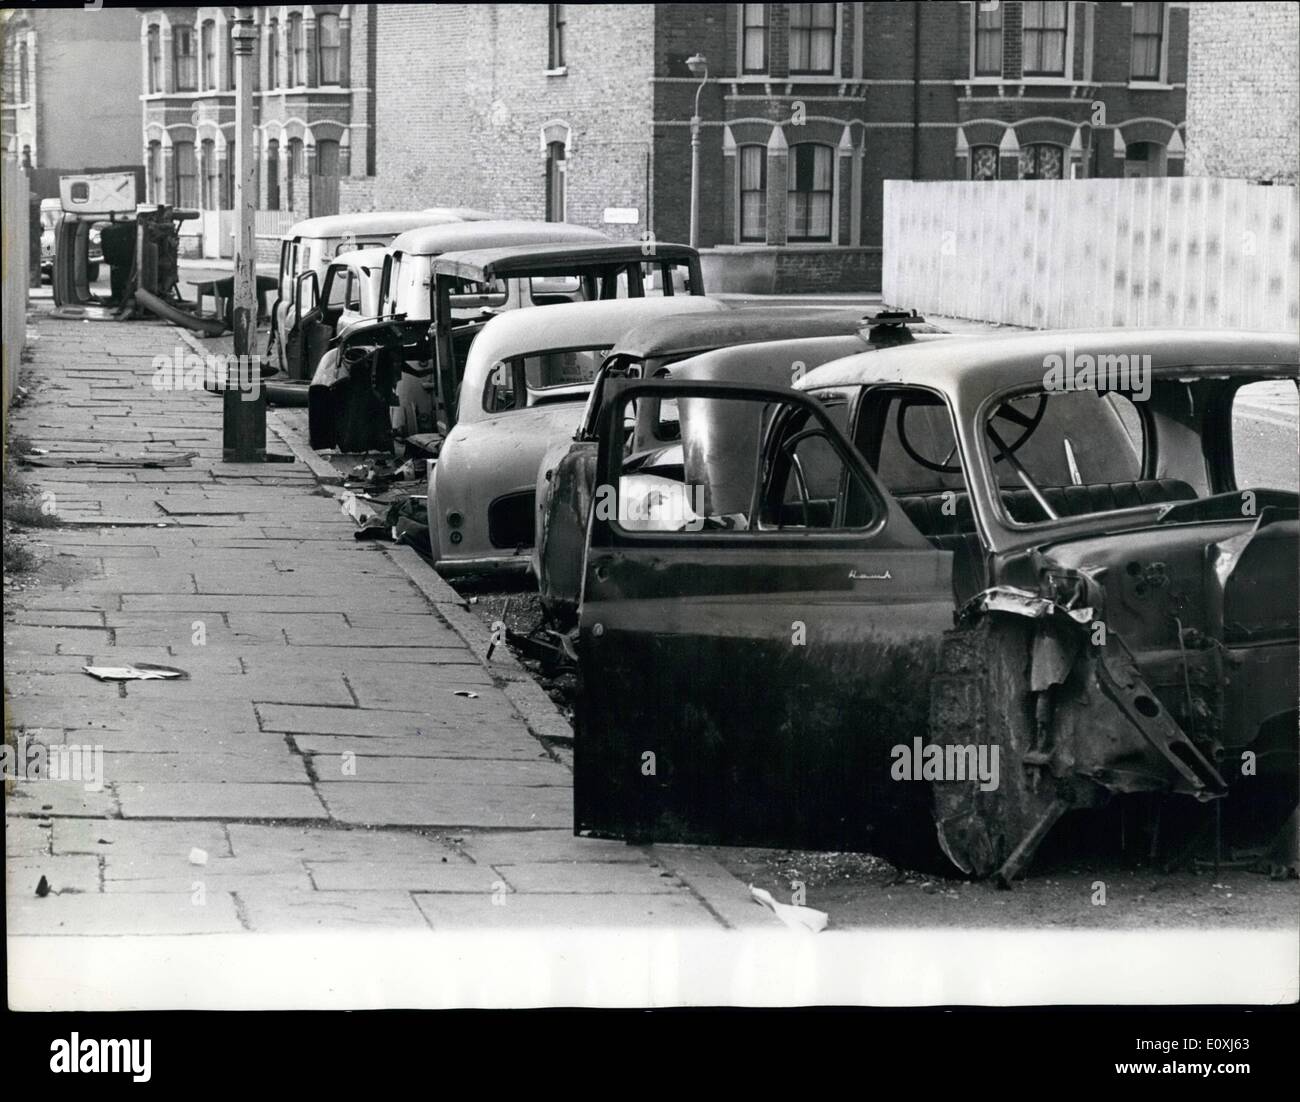 Feb. 02, 1967 - An eyesore in a London Street: Eight cars and vans stand neatly parked on the correct side of the road. Abandoned. Their contents and tyres rifled. Their bodywork burned. They are death and injury traps. They are also a familiar sight to the people of Cowan Street, Camberwell, in South-East London. Stock Photo